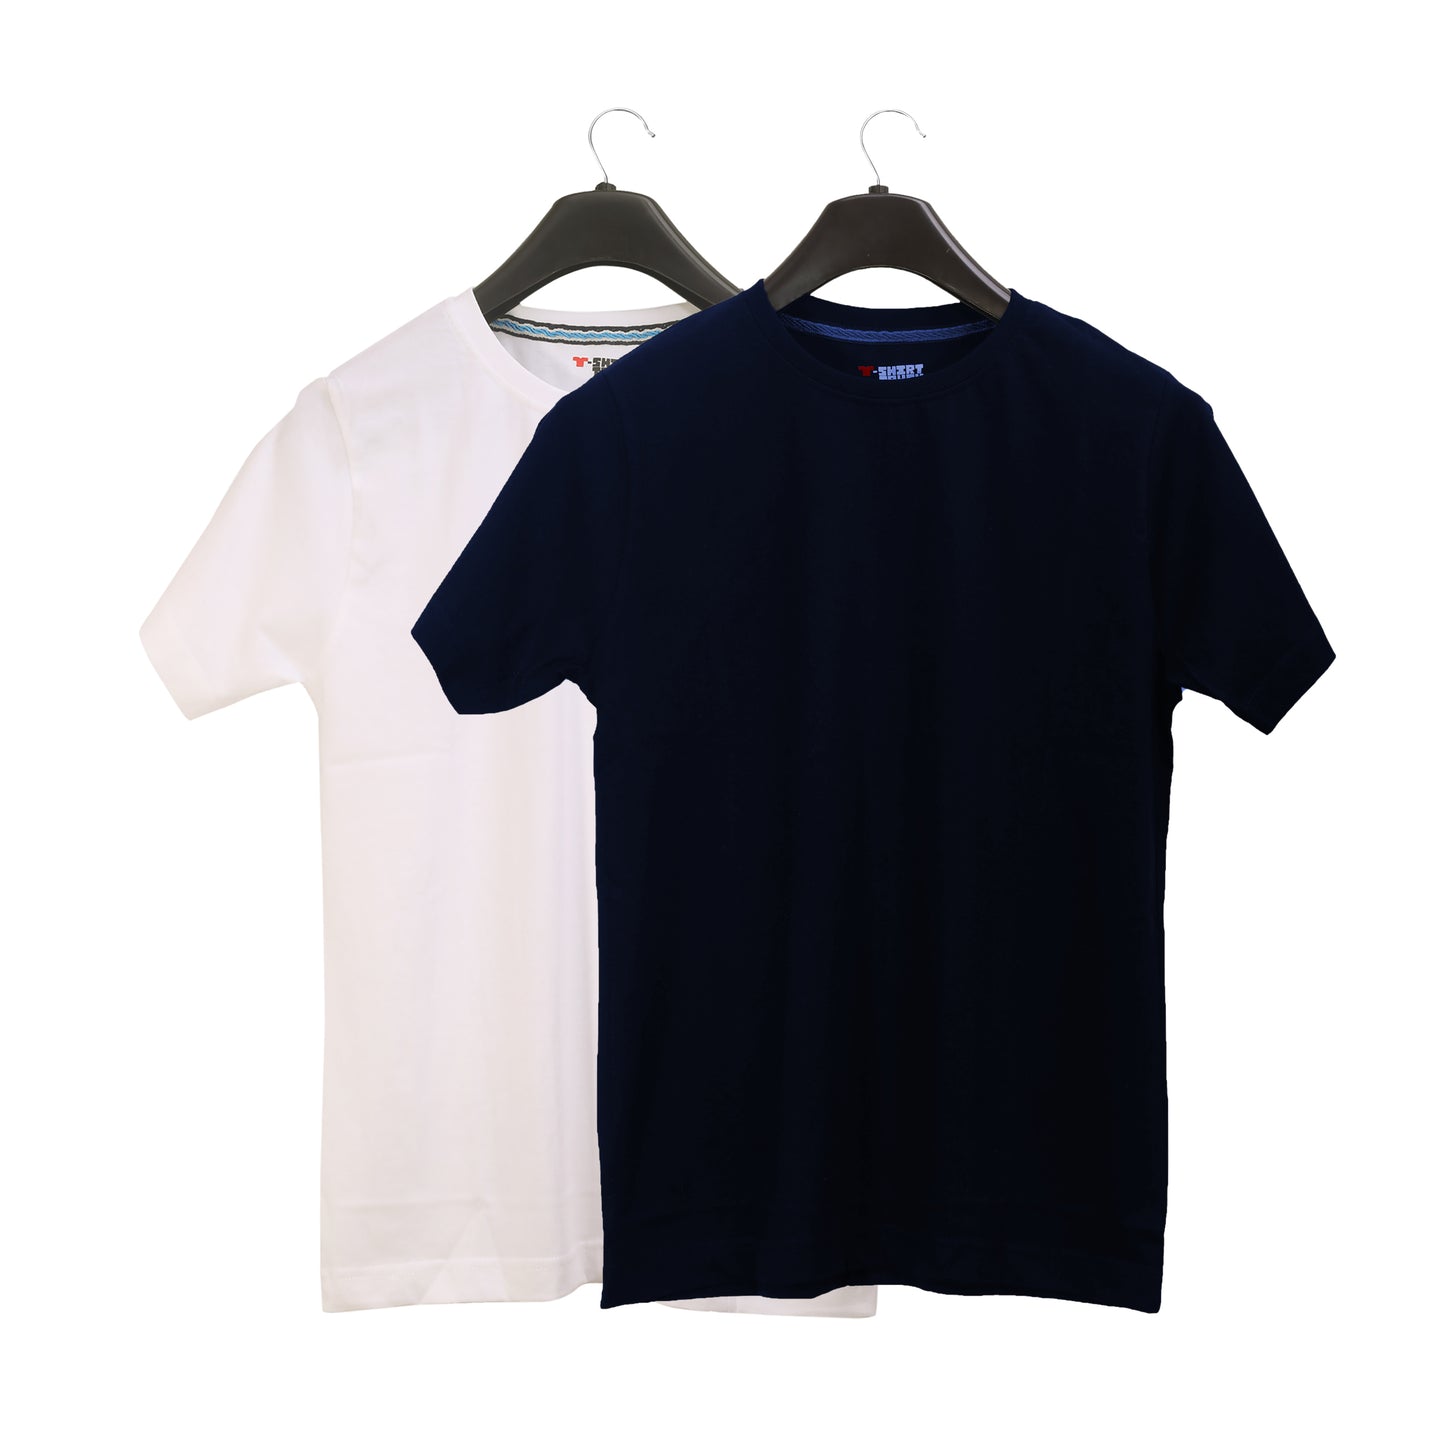 Unisex Round Neck Plain Solid Combo Pack of 2 T-shirts White & Blue